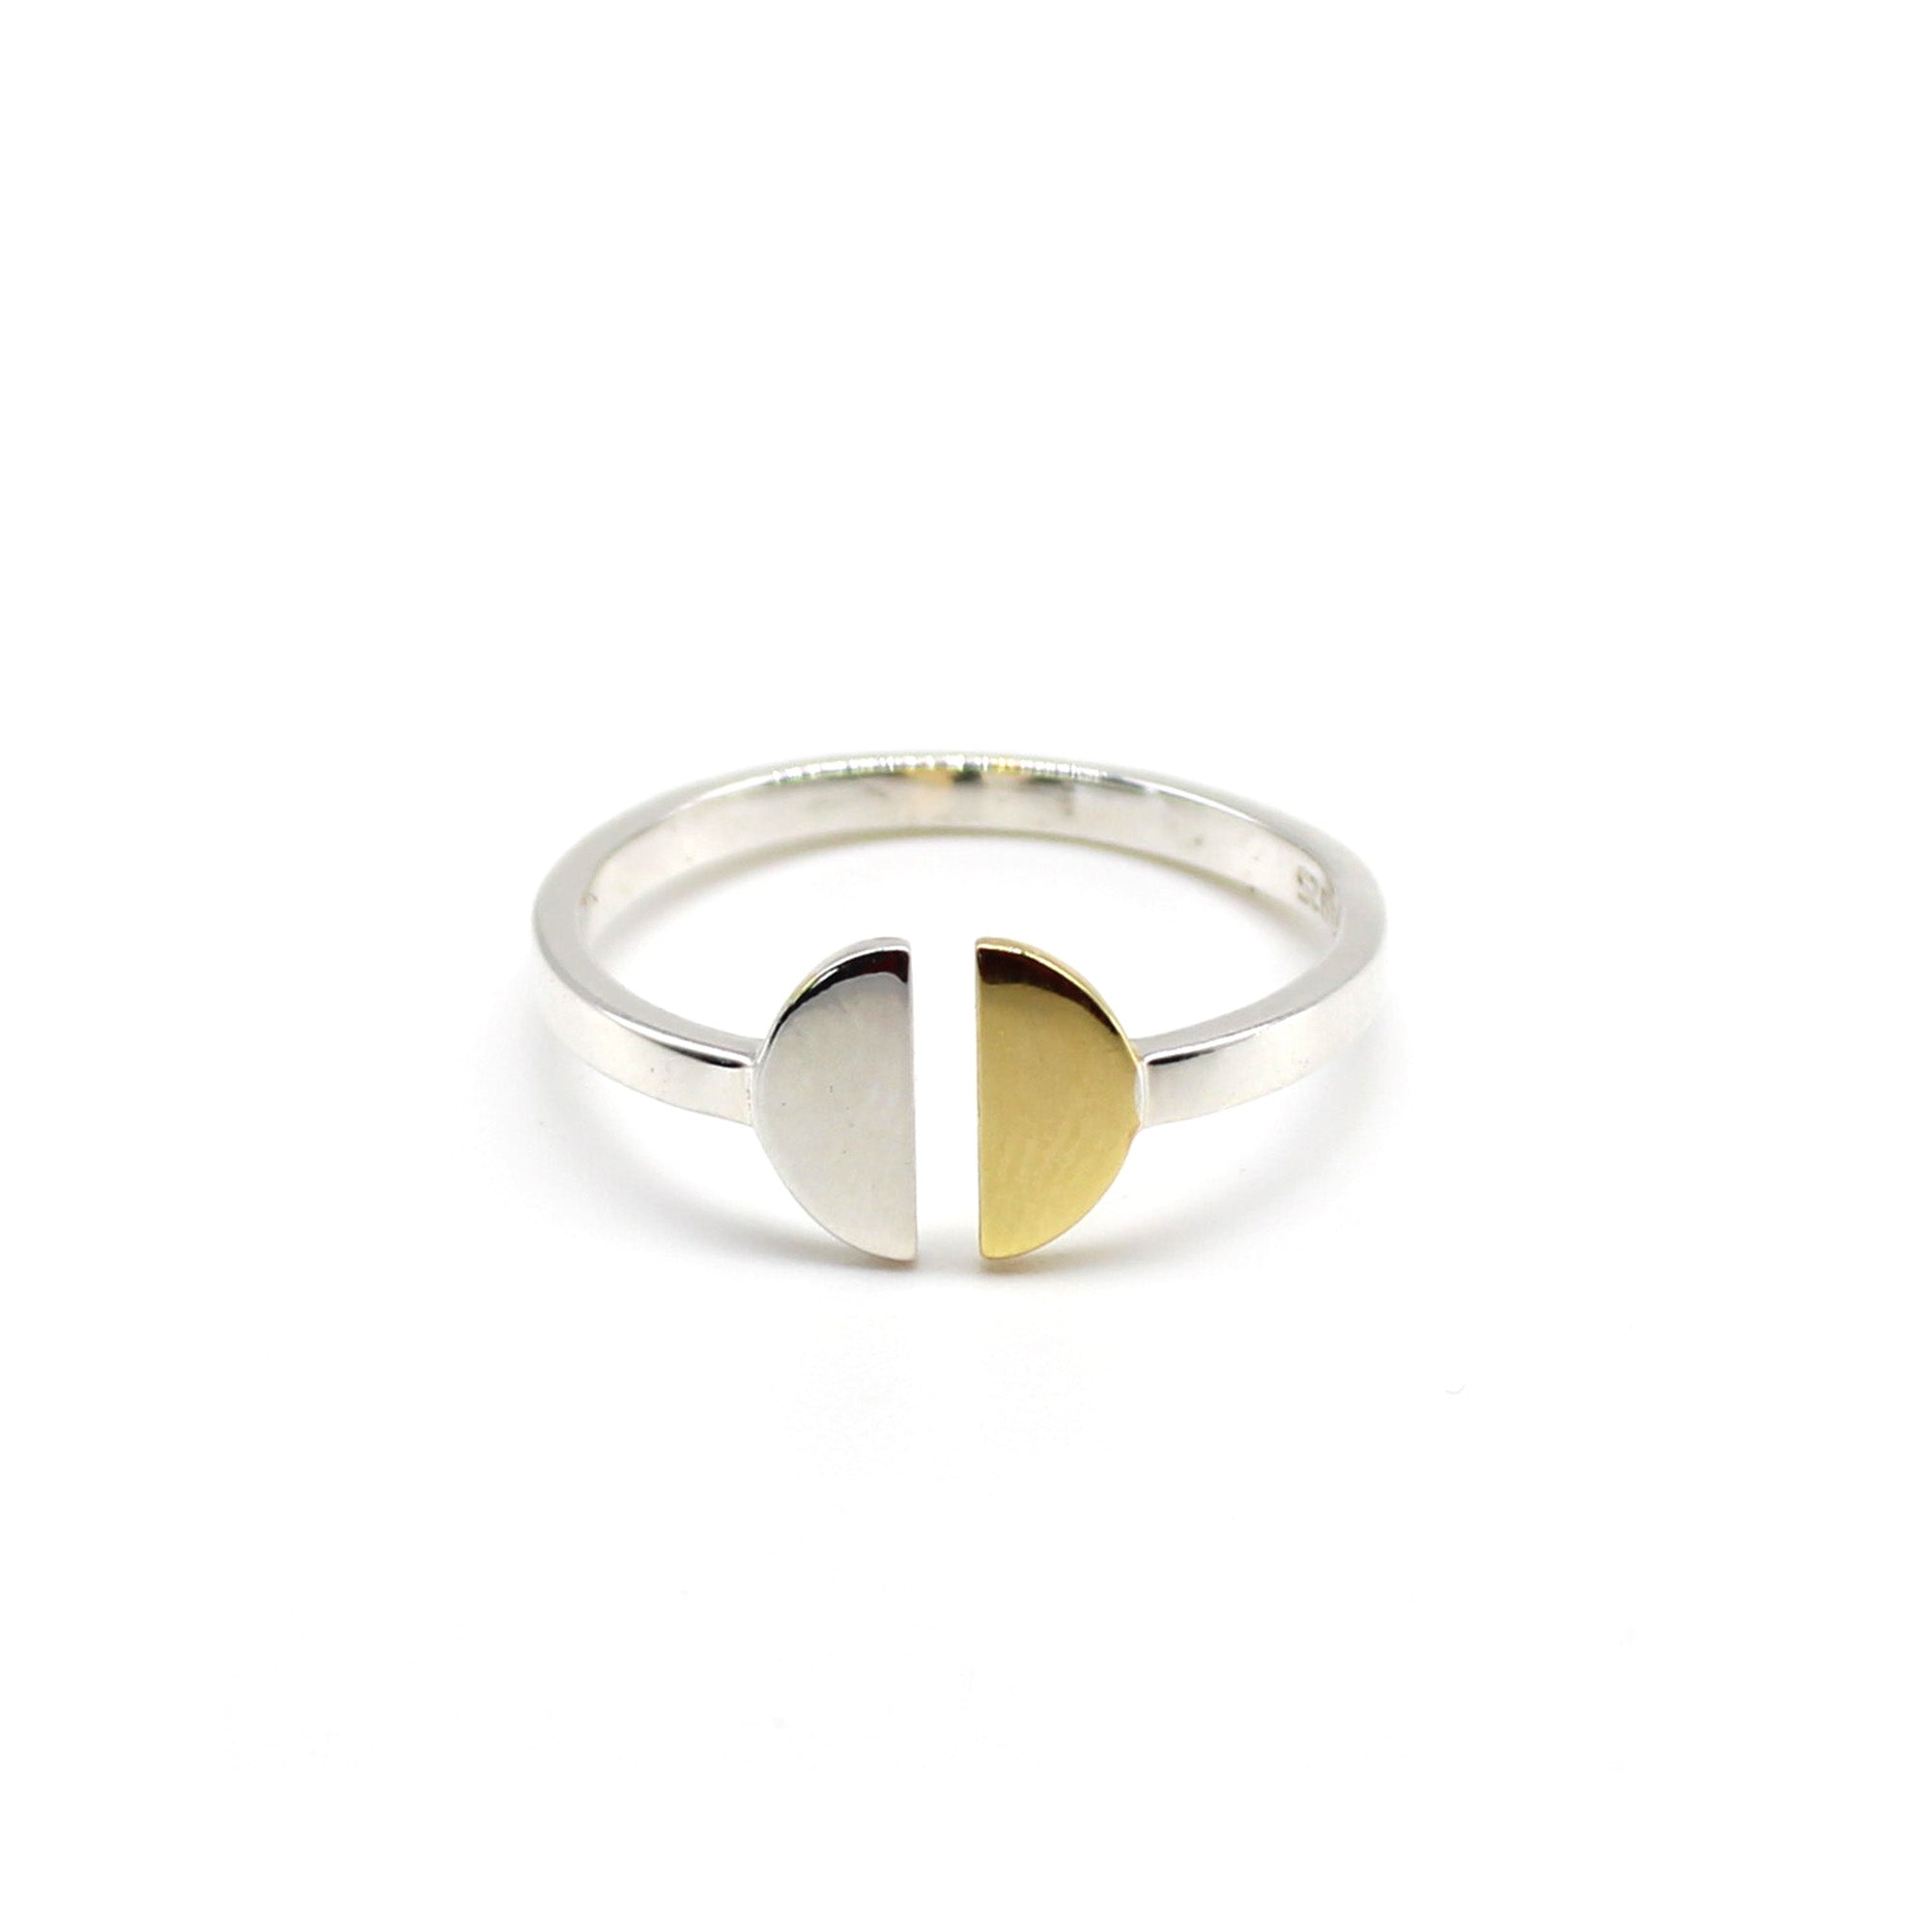 half silver and gold moon shaped adjustable ring 